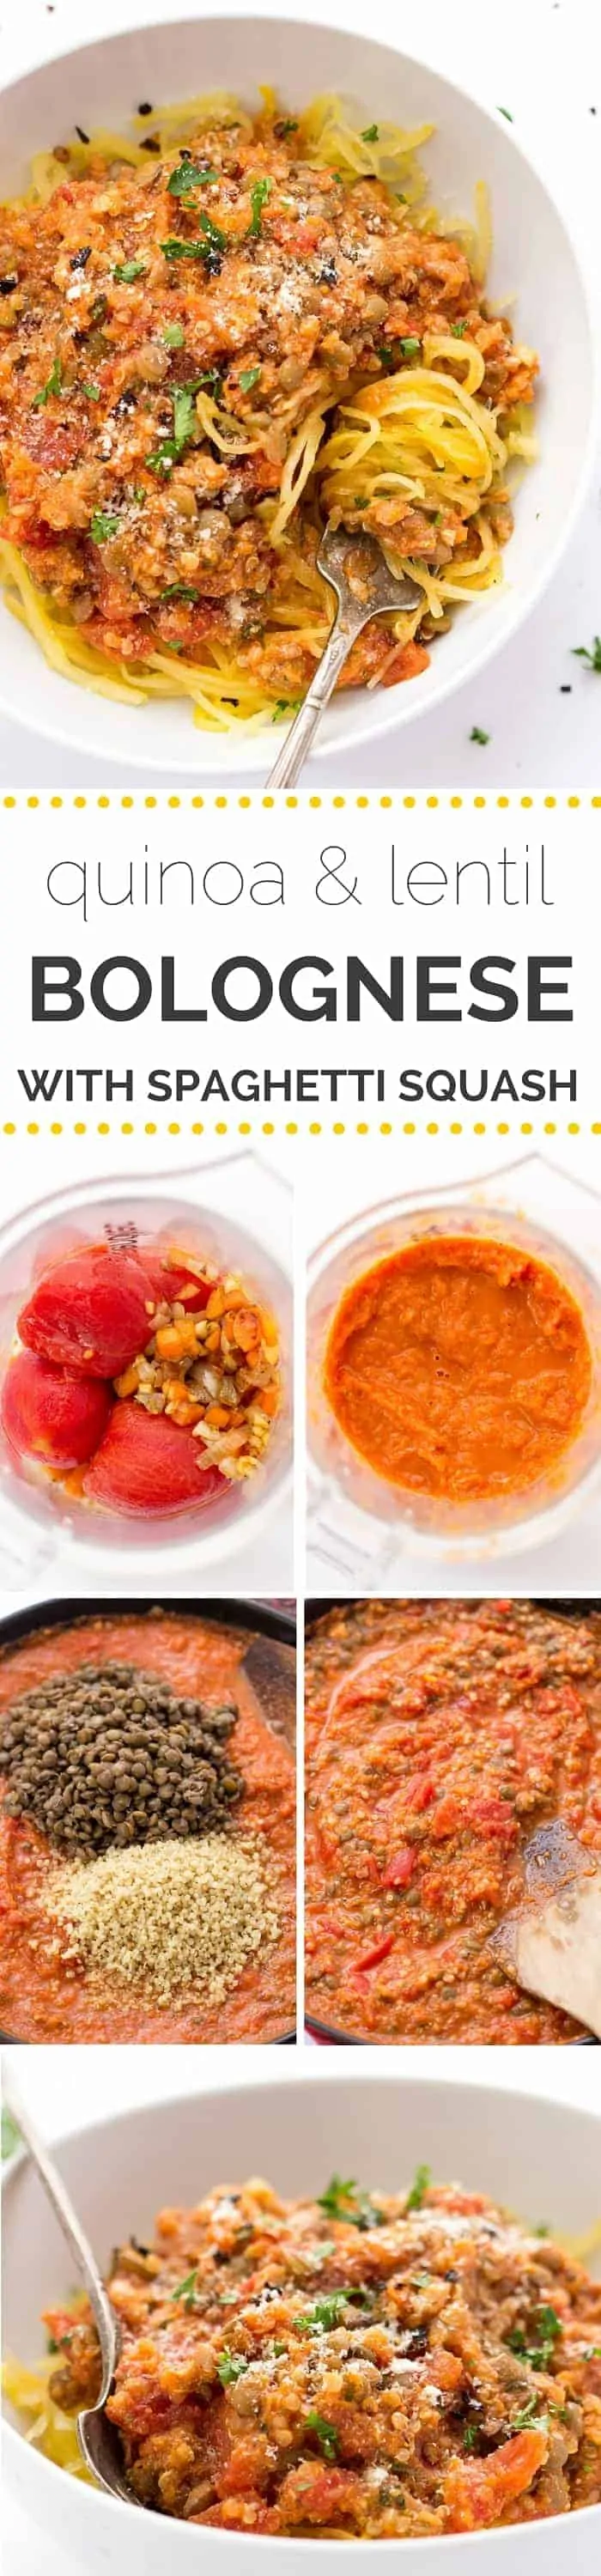 This super HEALTHY & VEGAN bolognese sauce is made with lentils + quinoa -- it's meaty without the meat products! [gf + df]